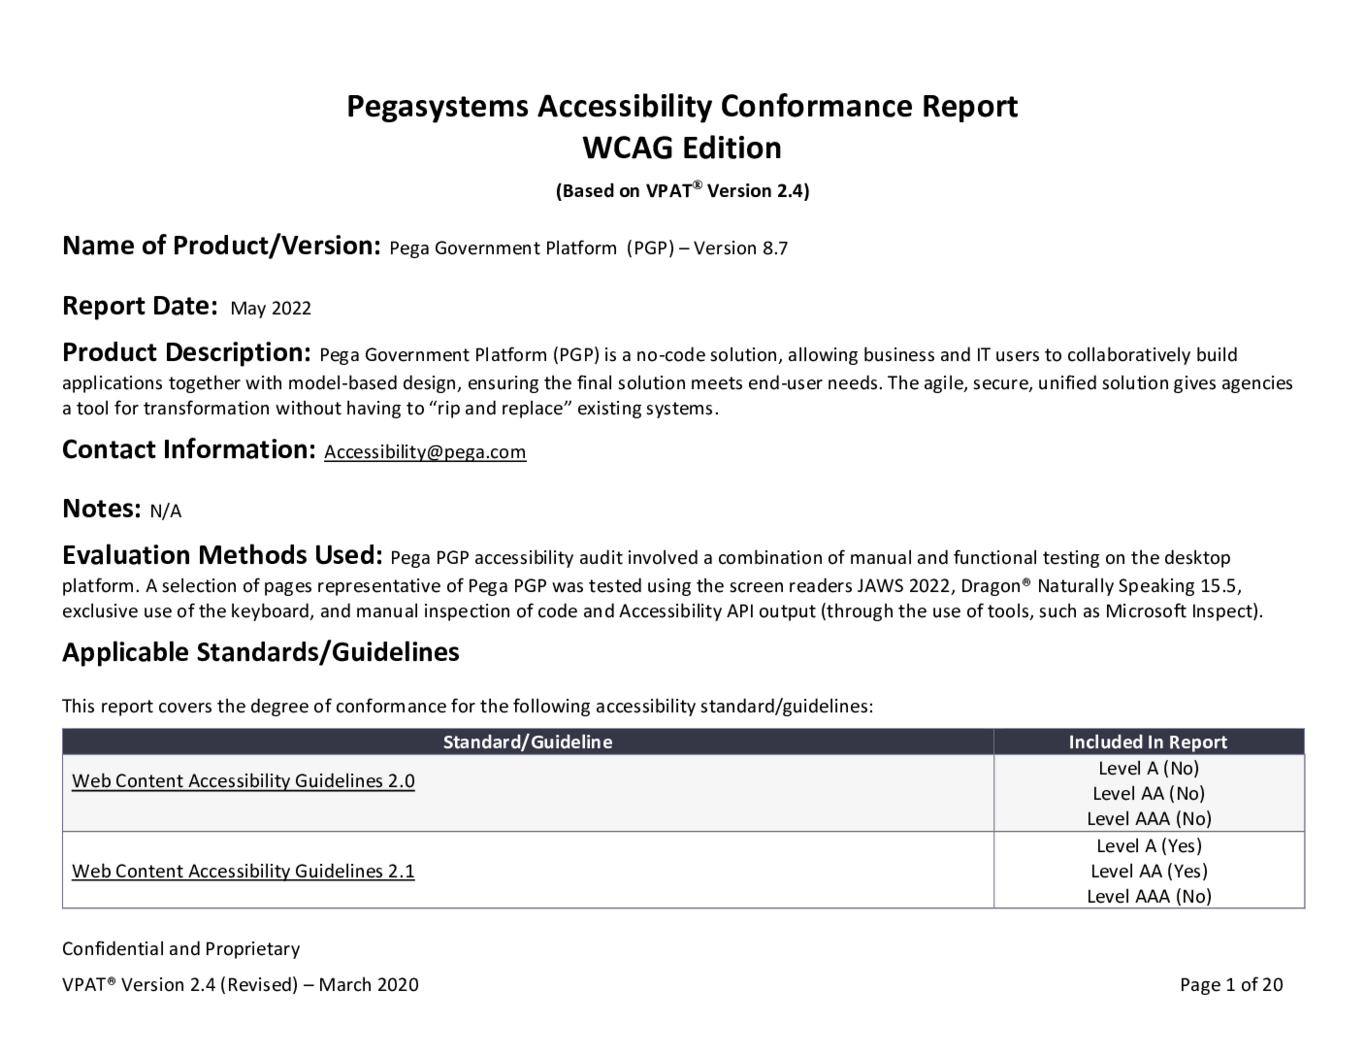 Voluntary Product Accessibility Template for Pega v8.7